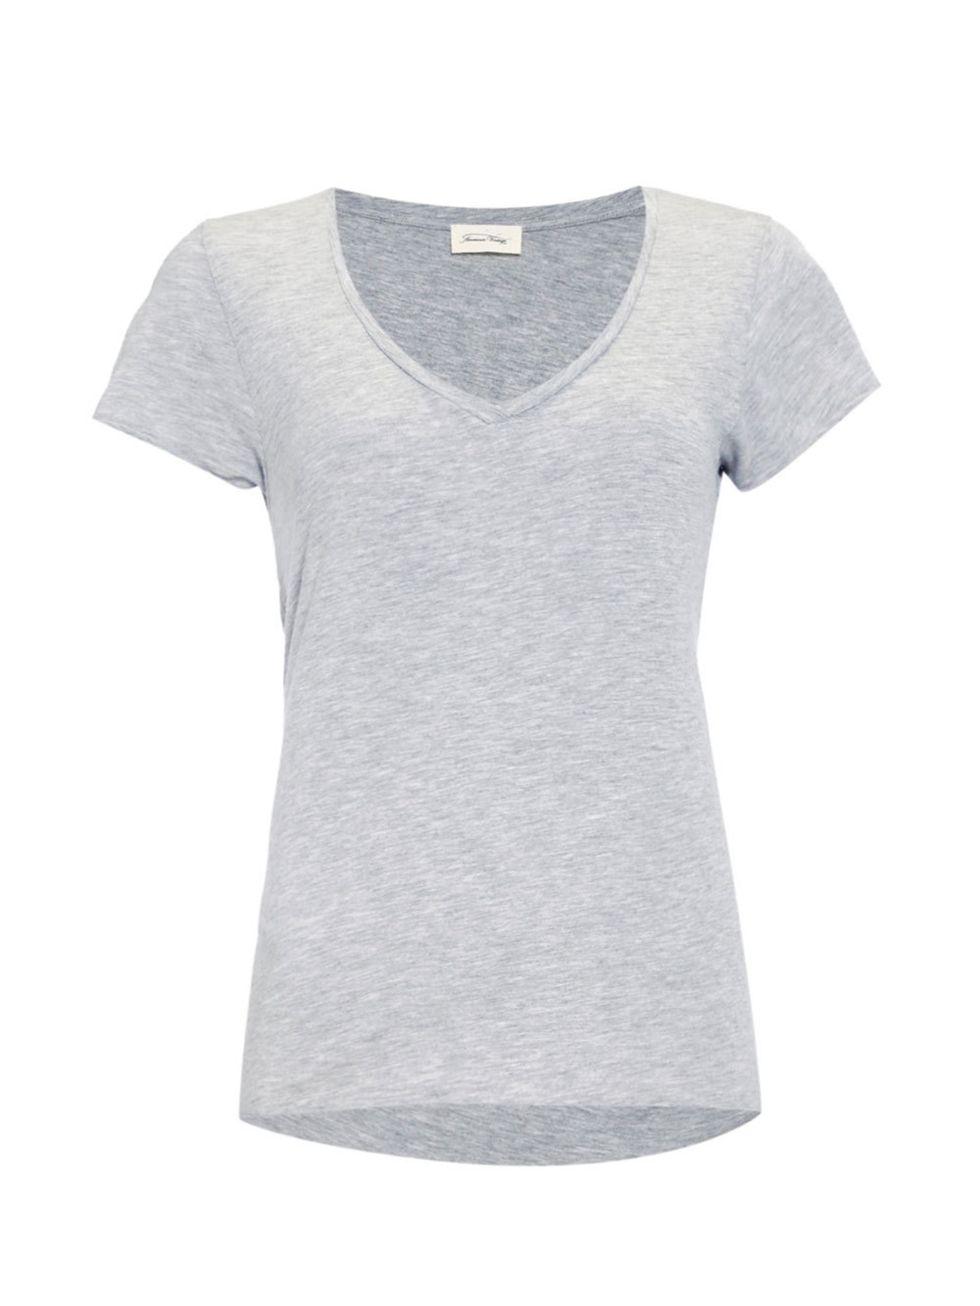 Product, Sleeve, White, T-shirt, Grey, Active shirt, Top, Silver, 